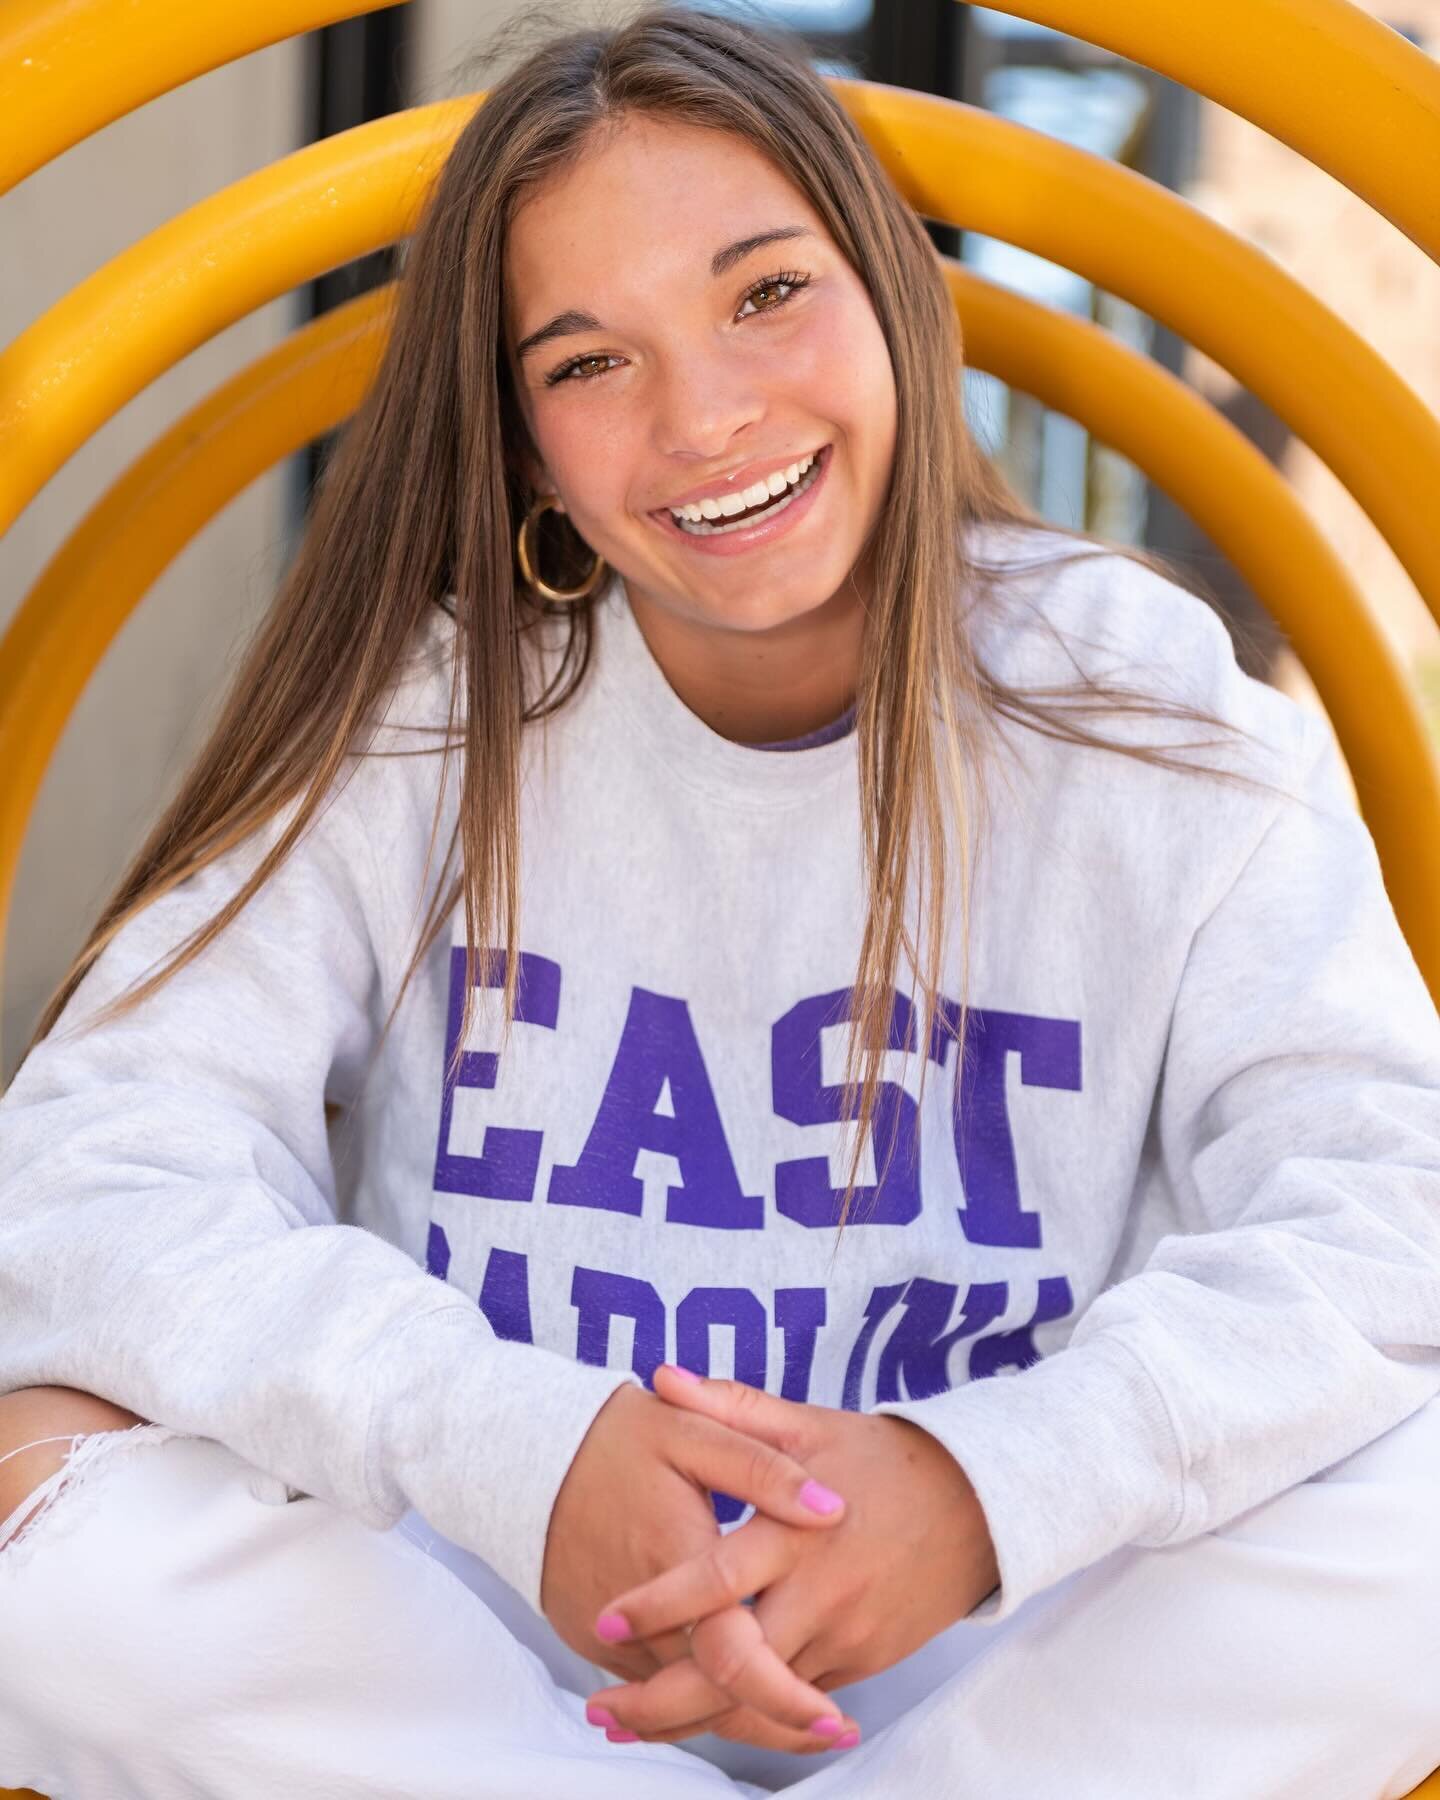 if you&rsquo;re heading off to college next year, bring that college t or hoodie to your senior shoot!

#ncphotographer #ilmphotographer #downtownilm #seniorportraits #seniorpictures #seniorphotographer #wilmingtonnc #wilmingtonseniorphotographer